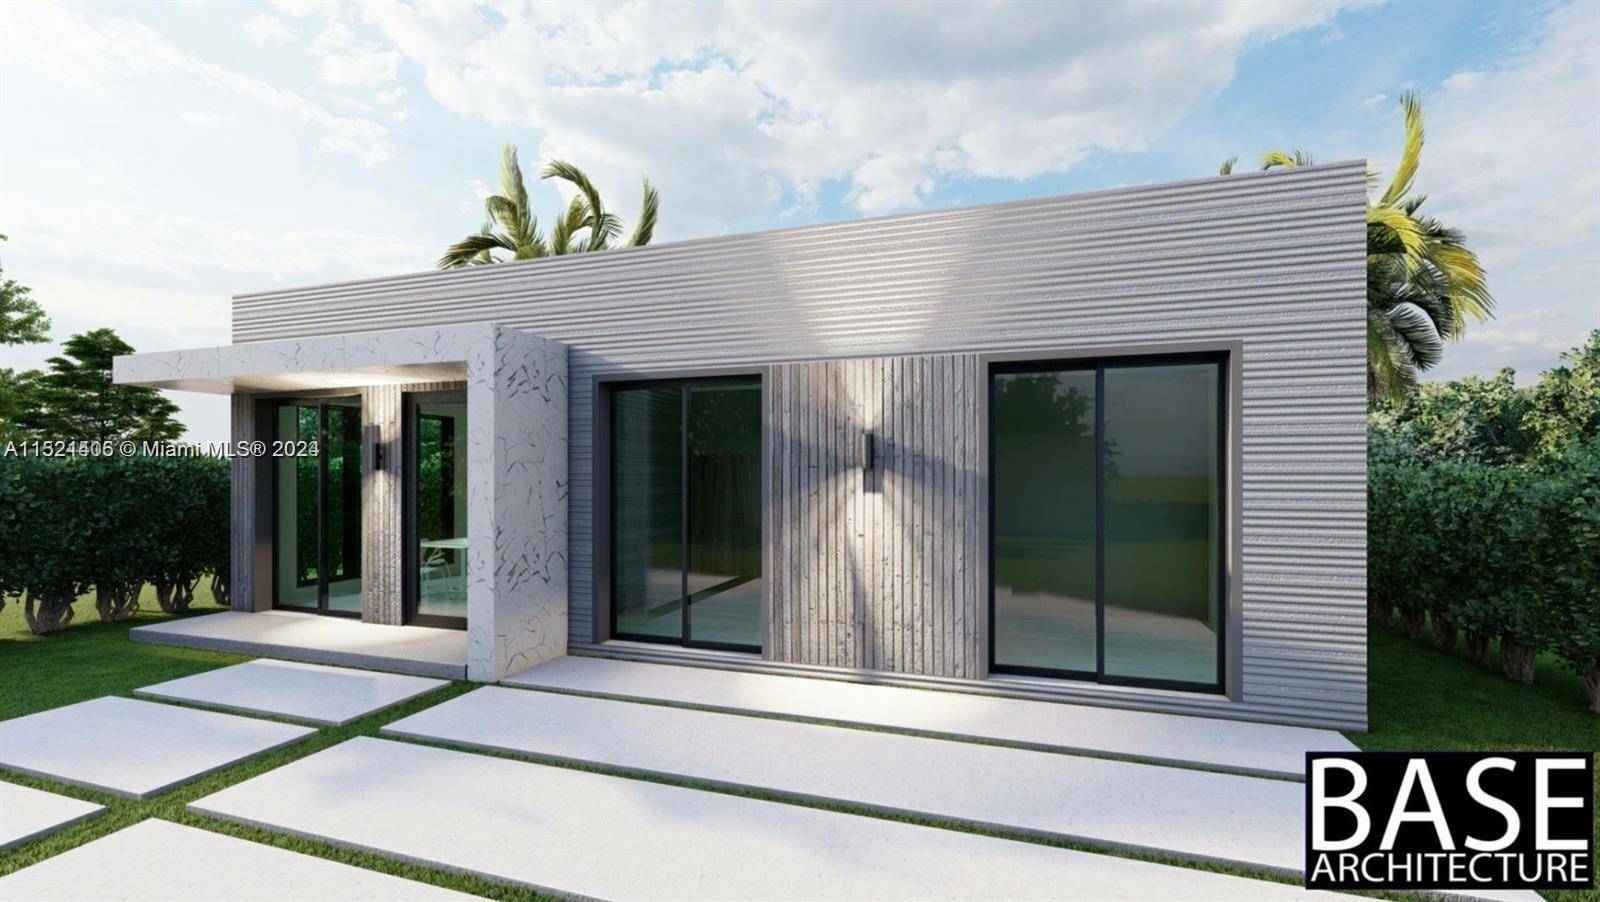 DON'T MISS OUT ON THIS BRAND NEW MODERN CONSTRUCTION LOCATED IN THE HEART OF HIALEAH.